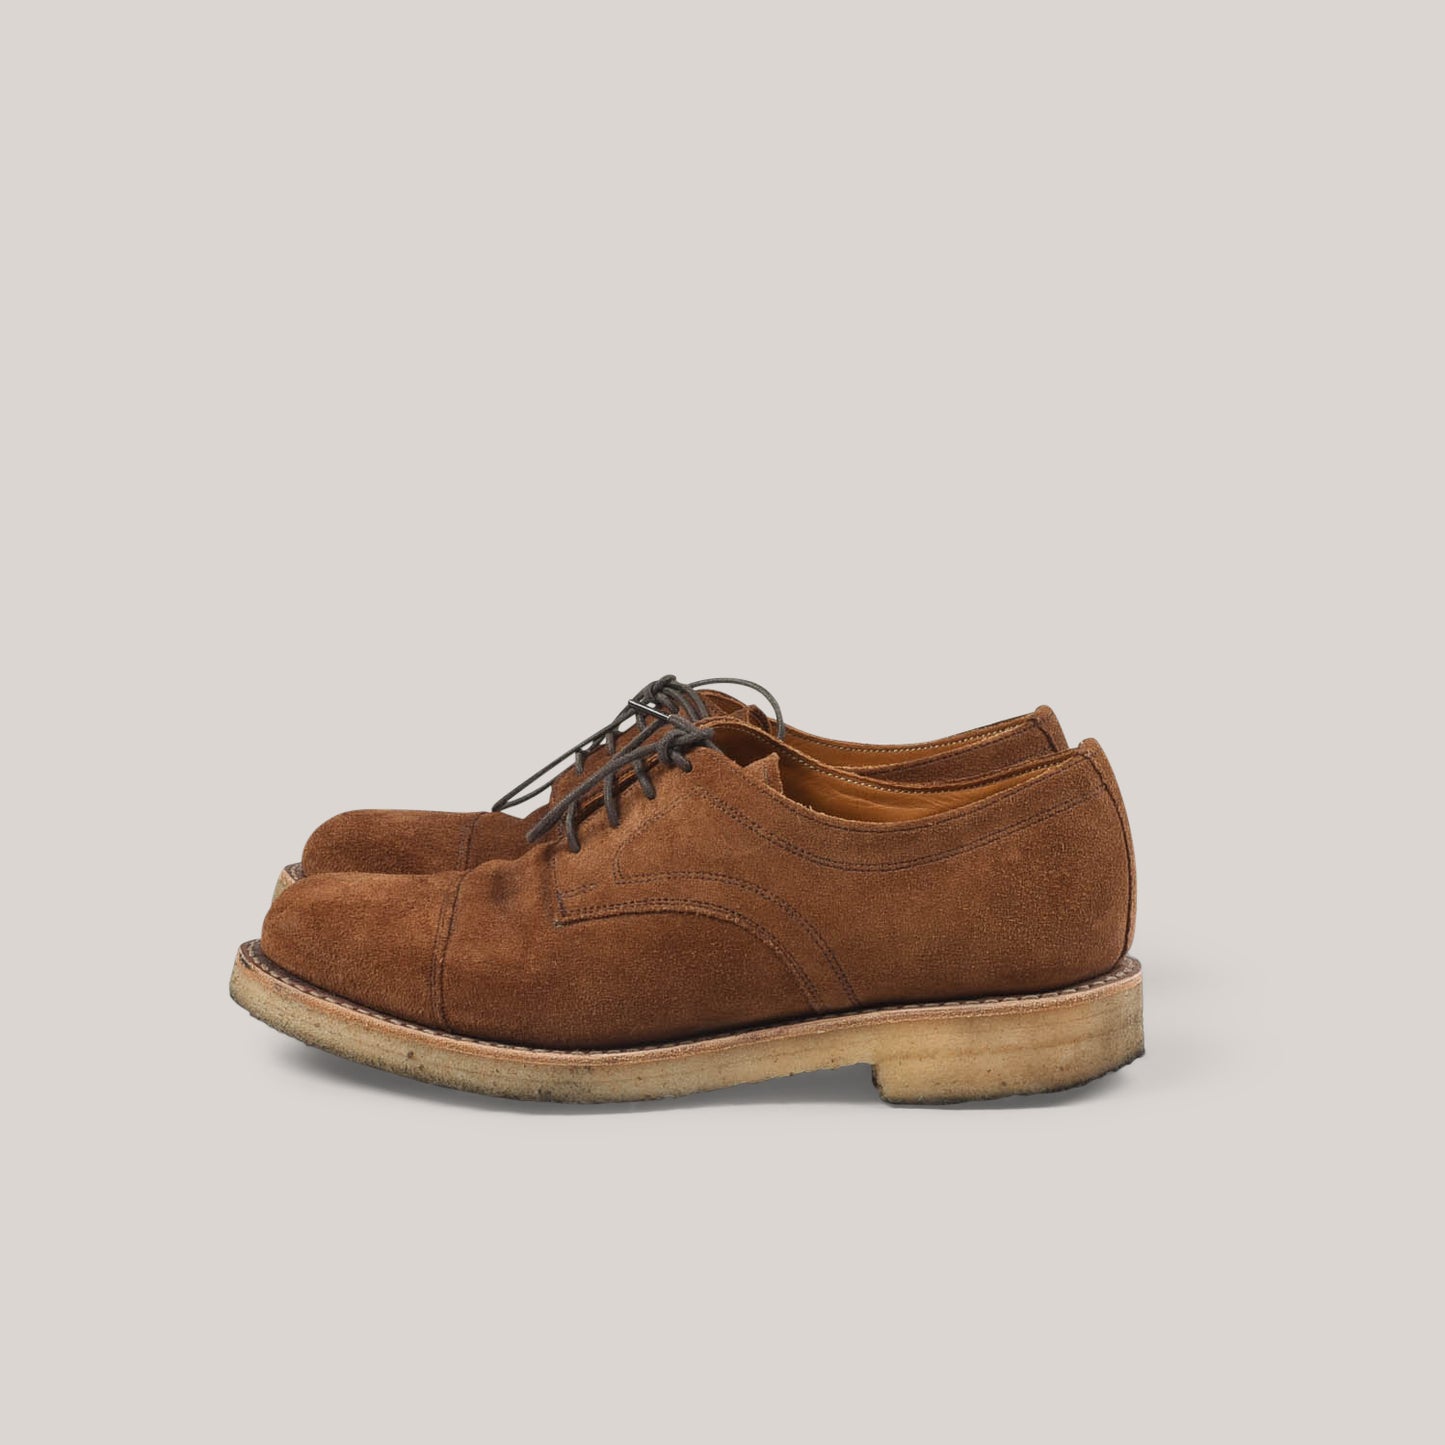 USED JOSPEH CHEANEY & SONS ELEANOR CAPPED DERBY - FOX SUEDE